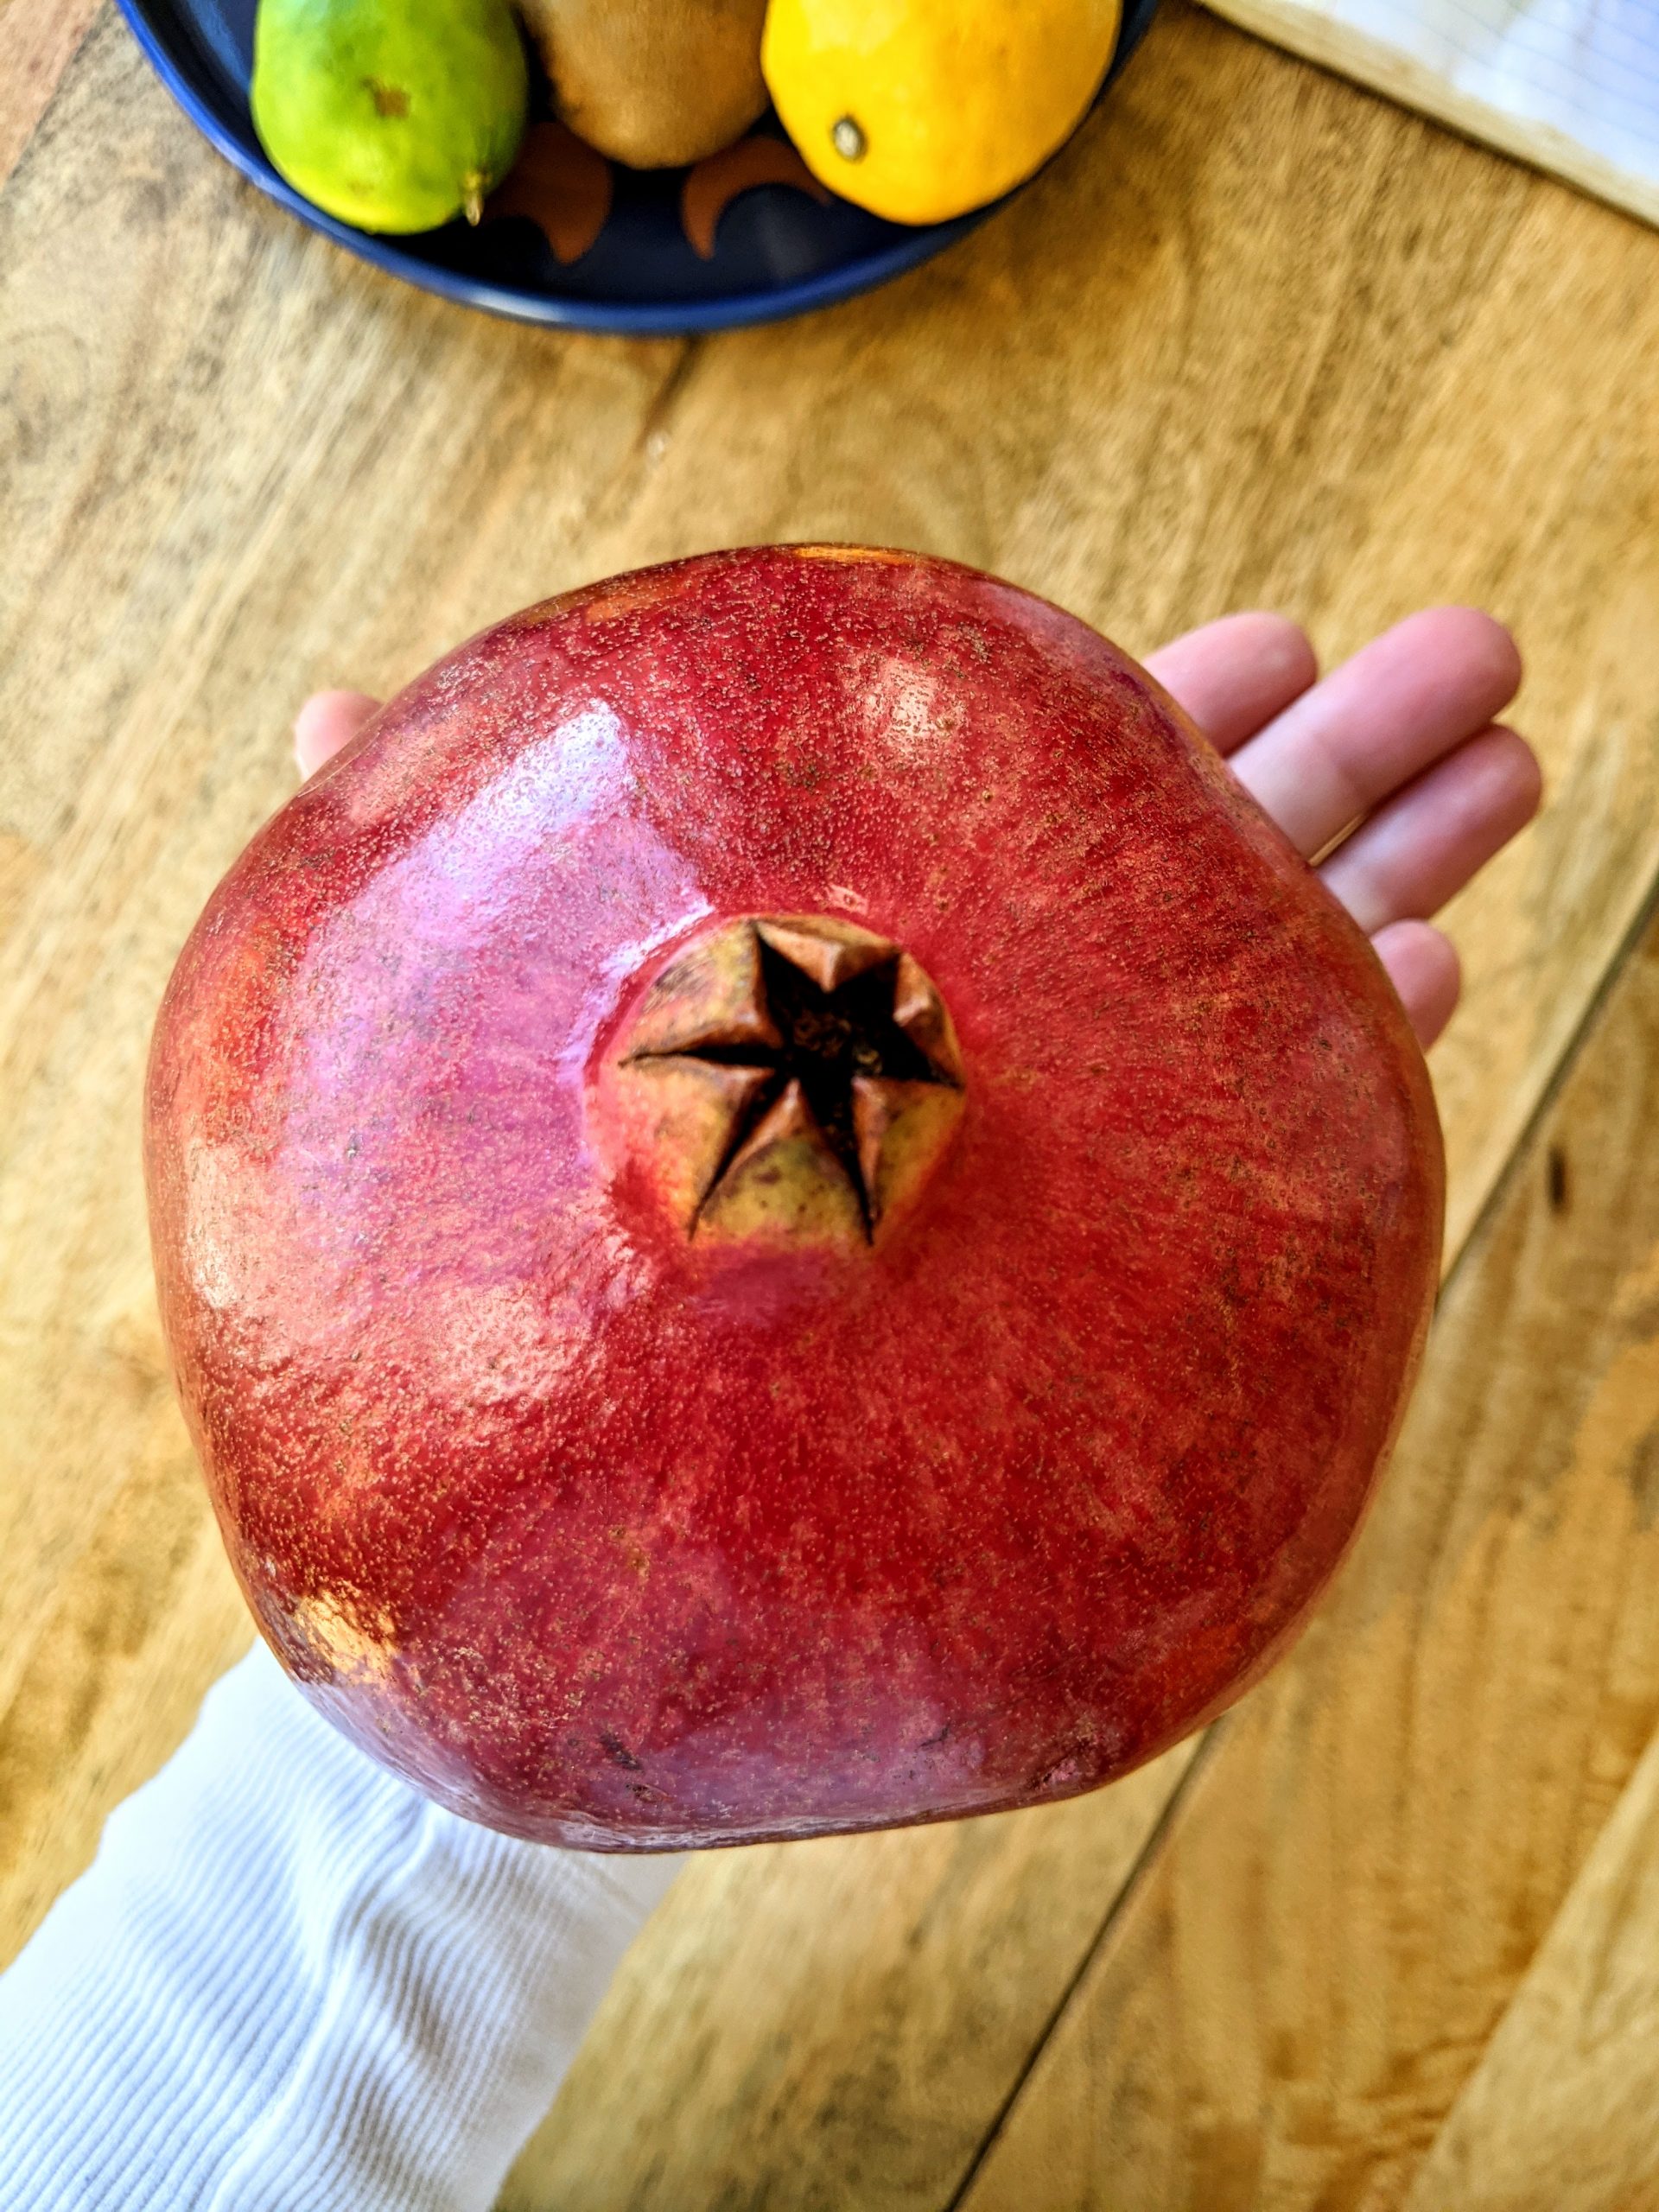 A giant pomegranate in the palm of my hand.